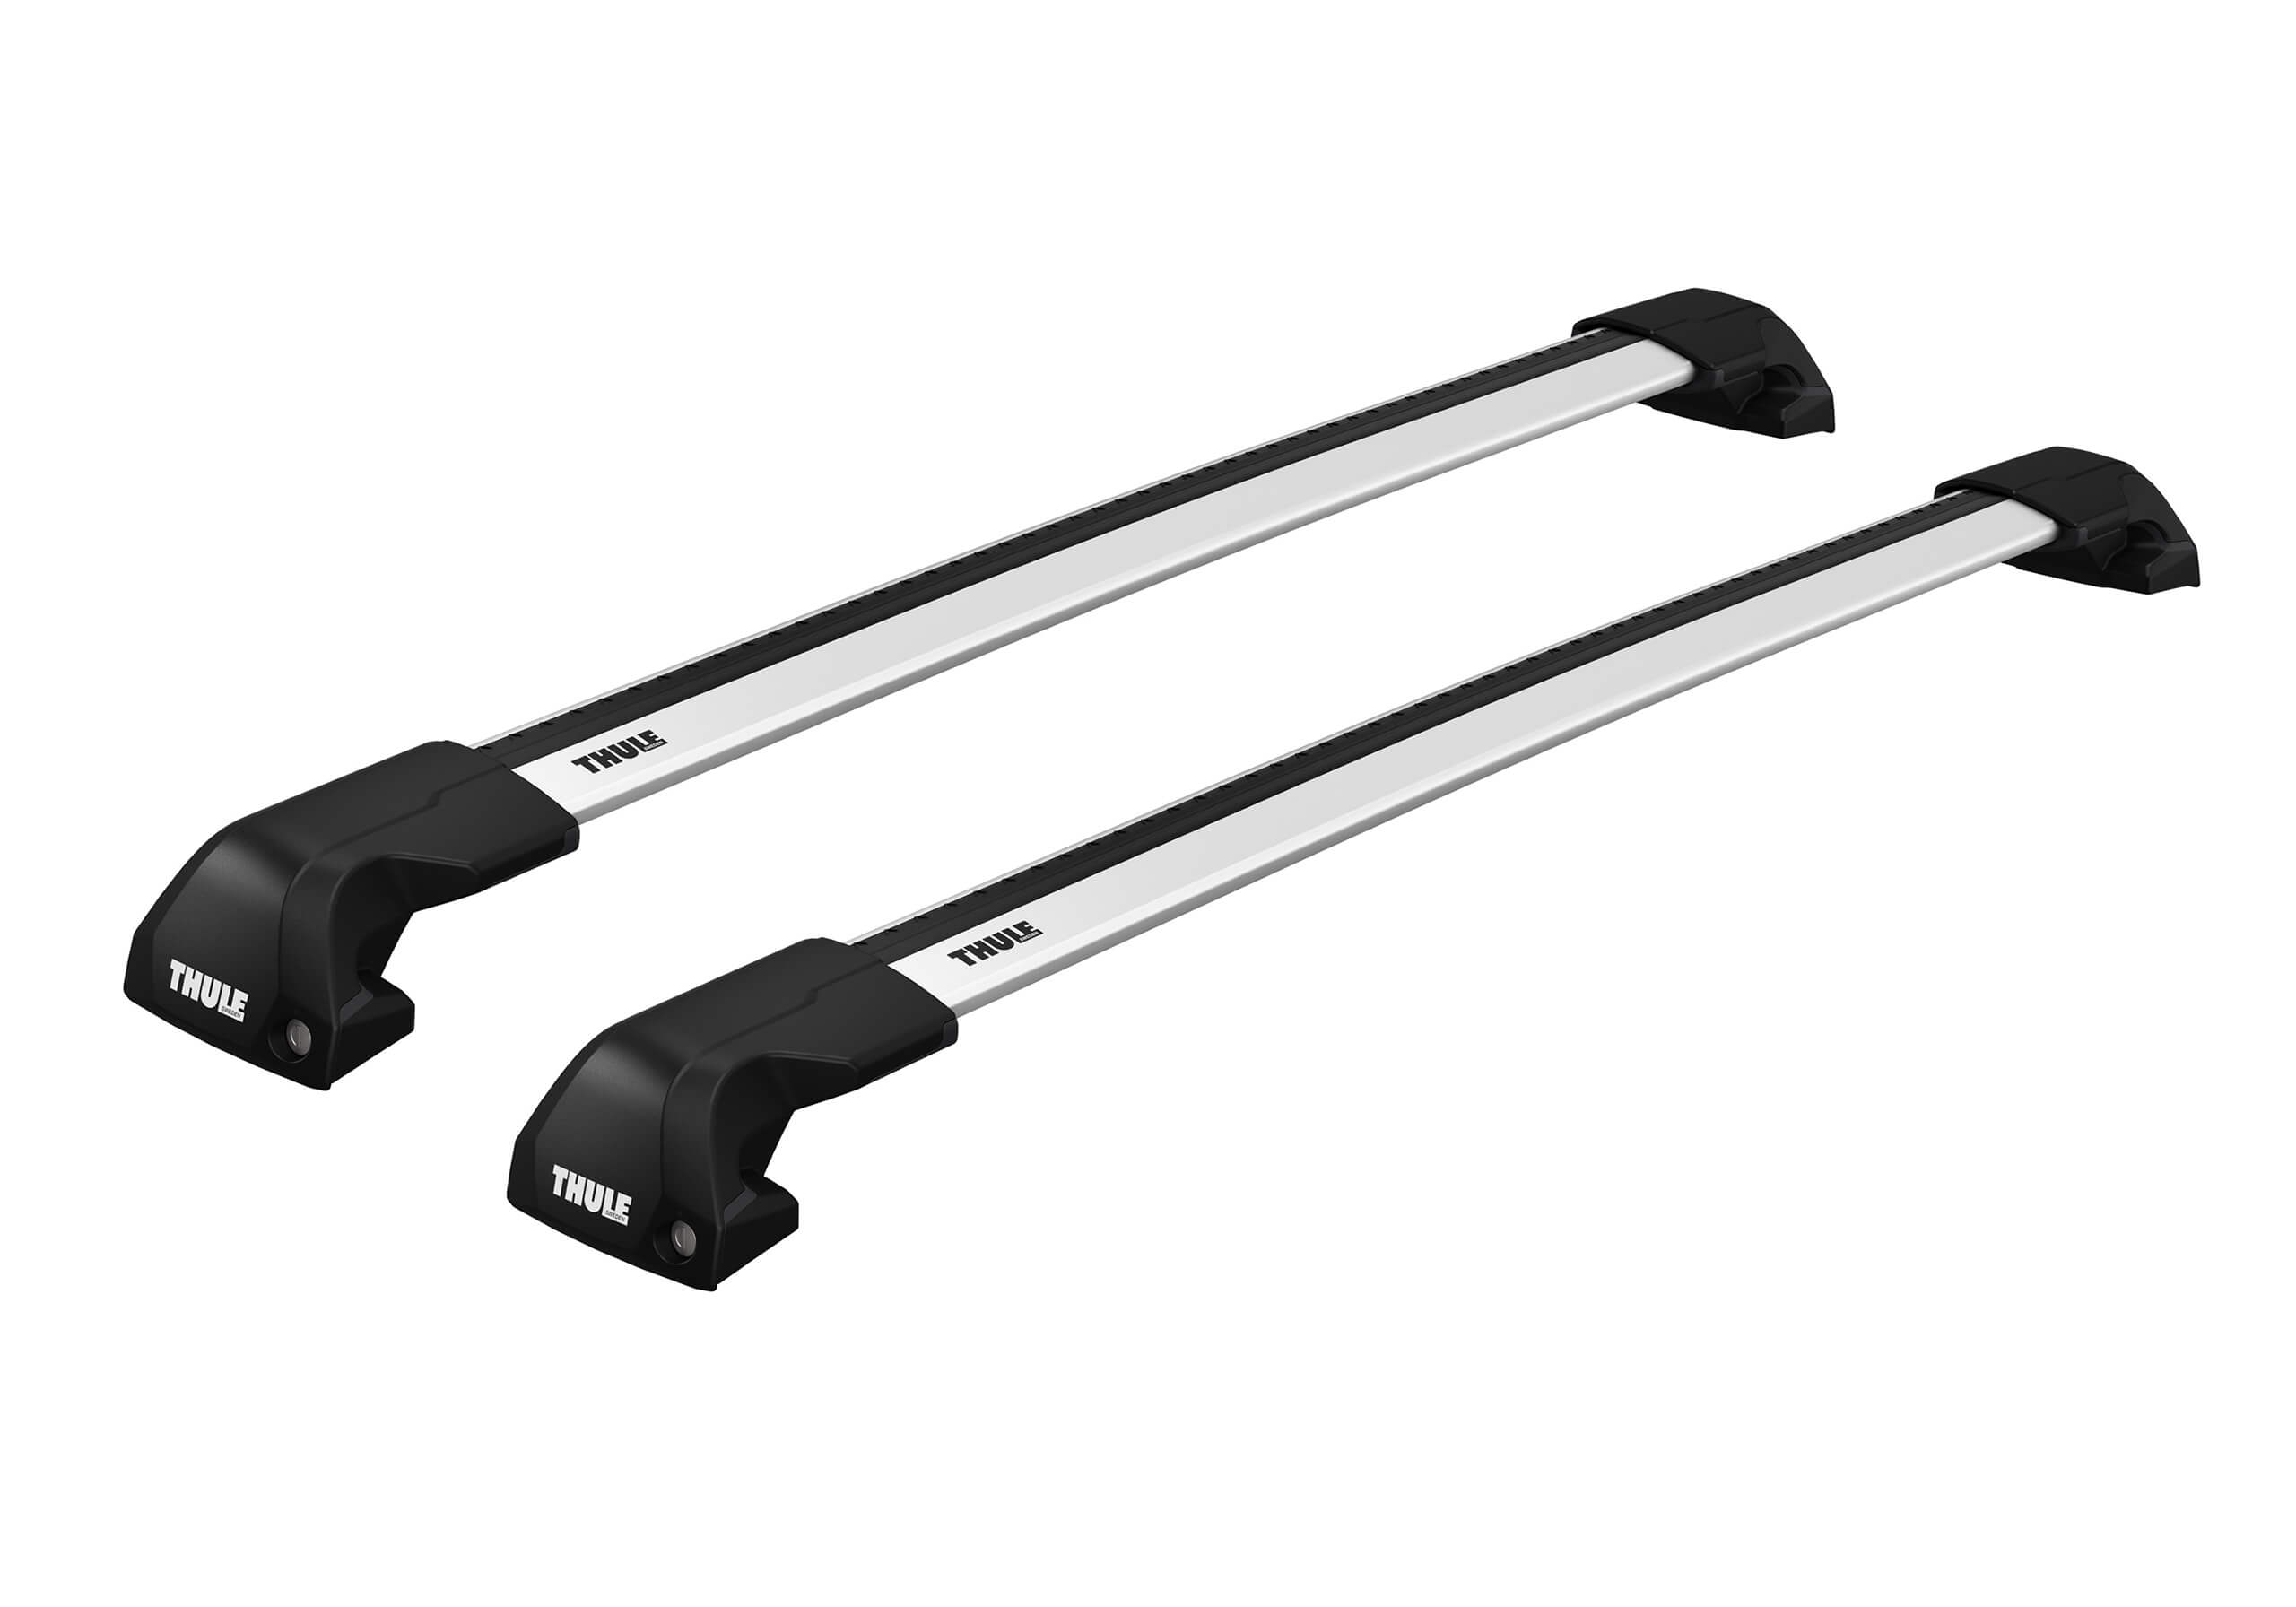 BMW X1 (2010 to 2015):Thule Edge silver WingBars package - 7206, 7214, 7213, 6038